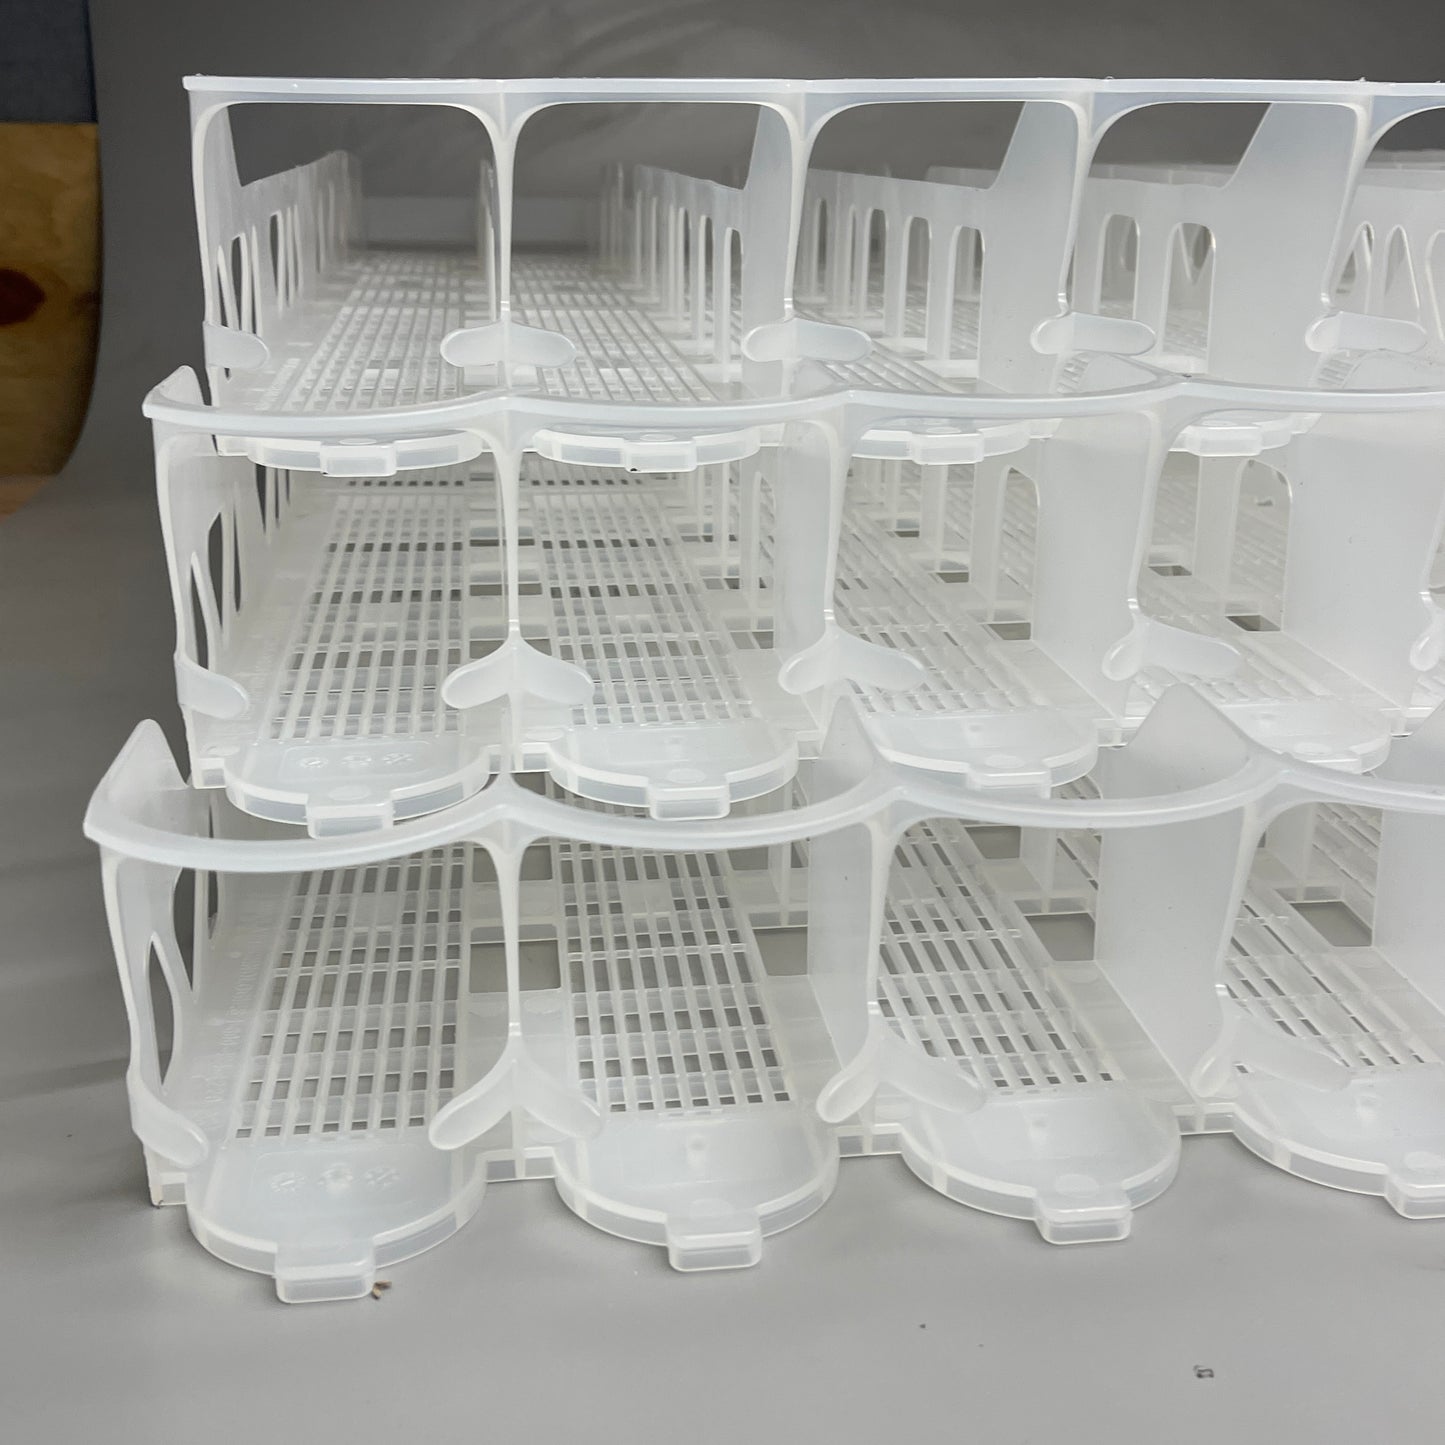 VISI SLIDE Can & Bottle Organizer Low Profile 21” or 36" Deep Adjustable - Case of 12 Main Pieces